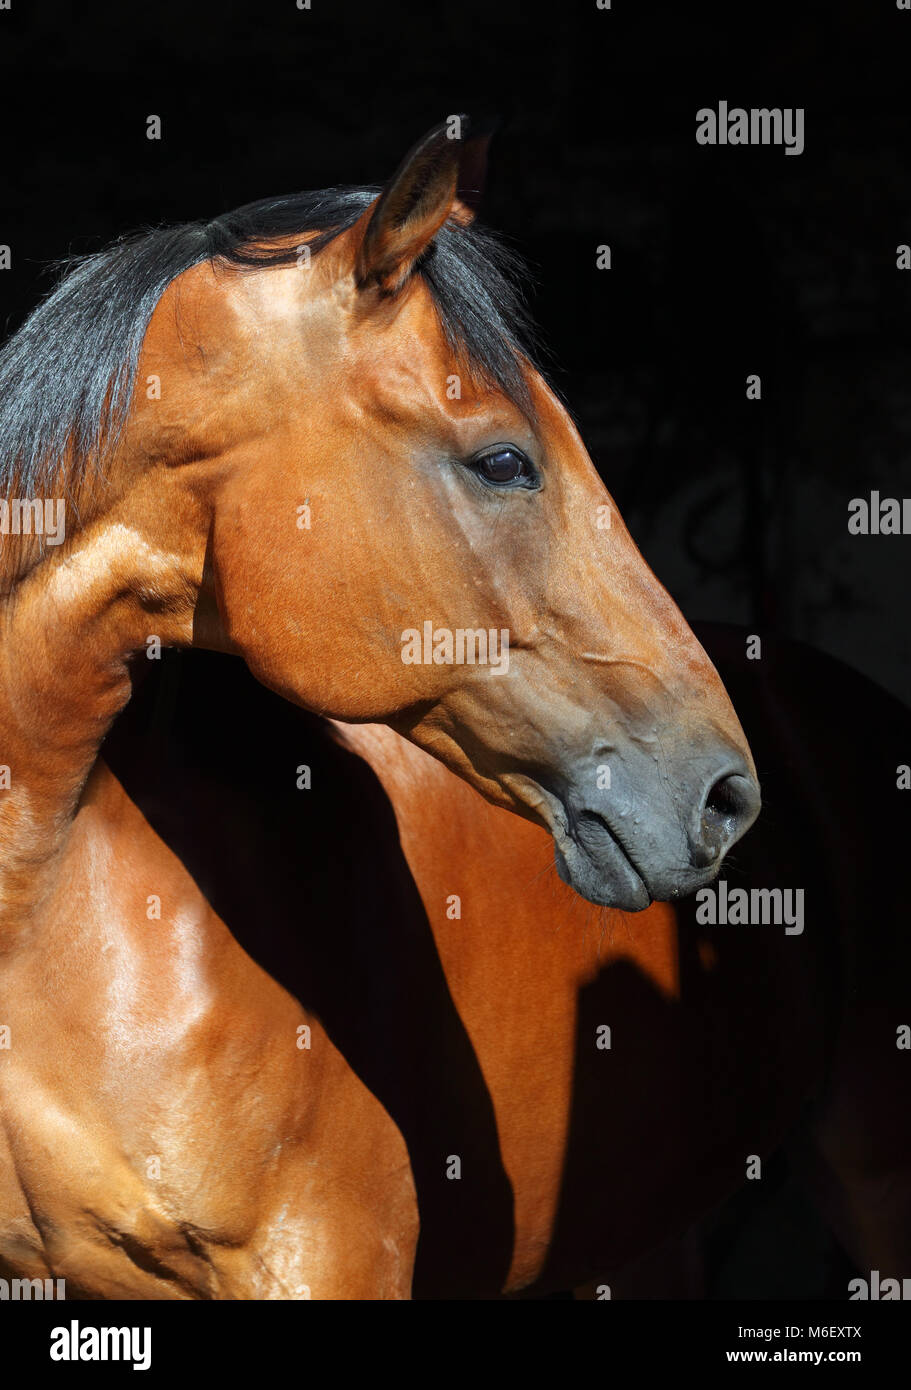 Bay purebred dressage sports horse in dark stable Stock Photo